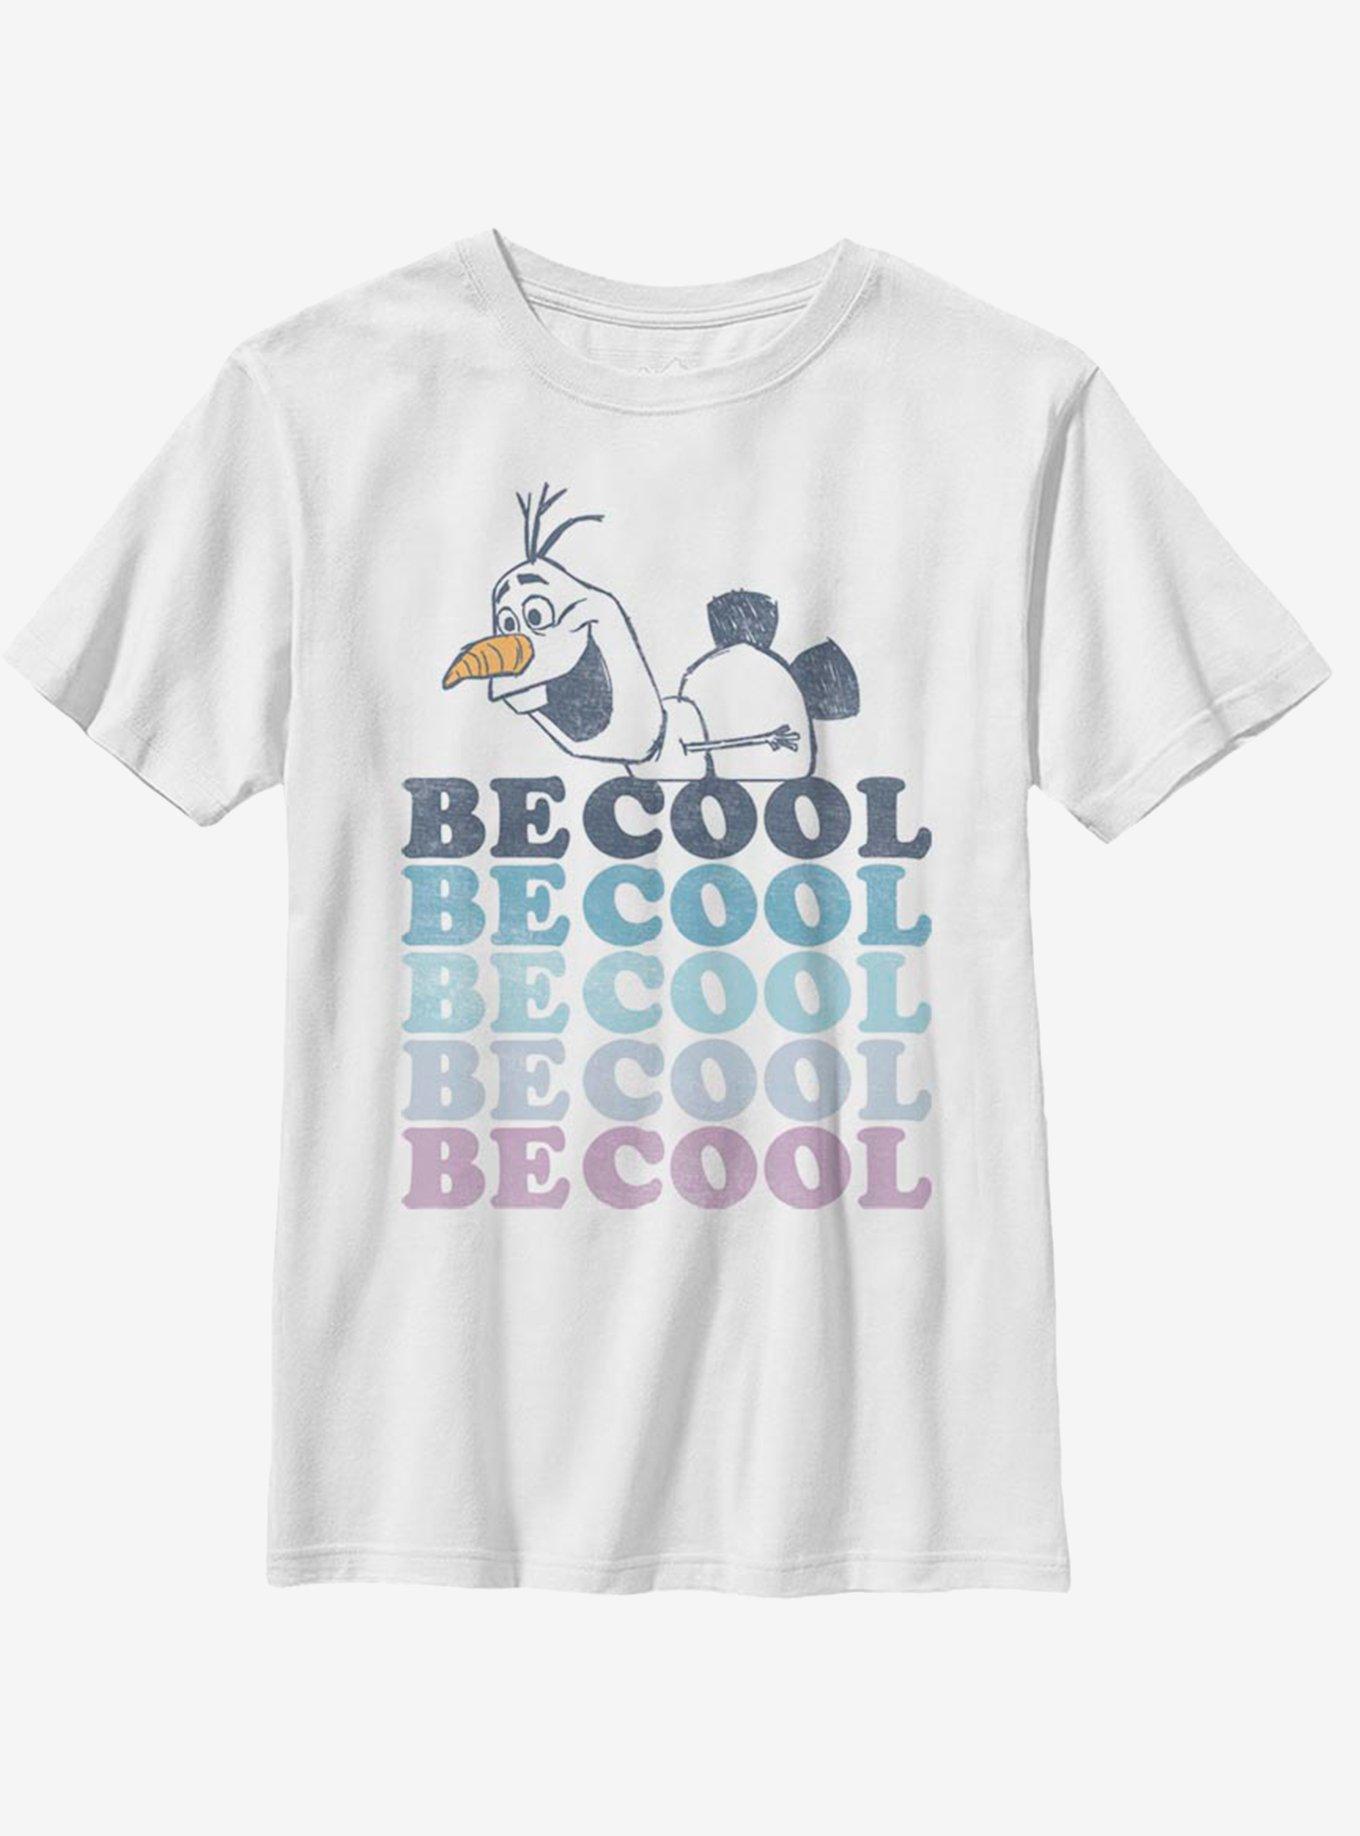 Disney Frozen 2 Olaf Be Cool Youth T-Shirt, WHITE, hi-res